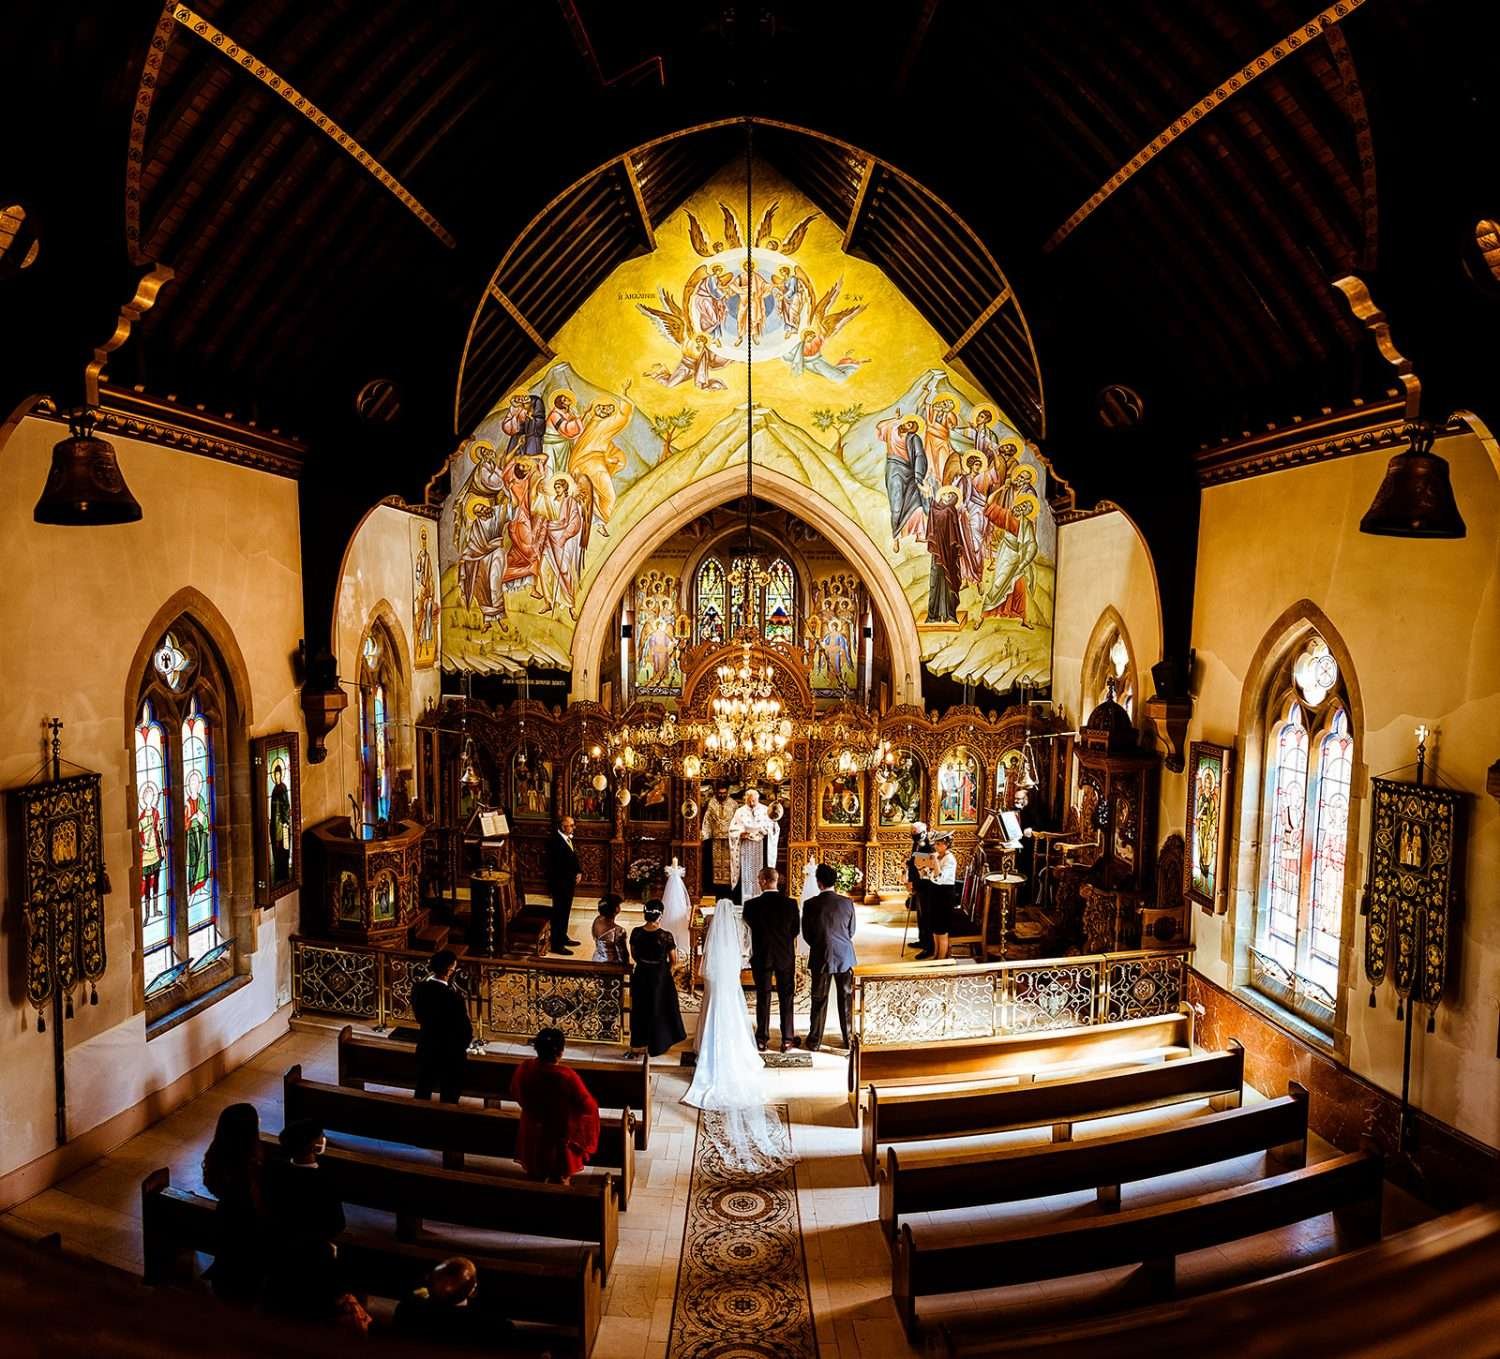 A bride and groom in a Greek Orthodox church during their wedding ceremony. The church is lit by sunlight and the walls and furniture are richly decorated in yellows and gold leaf.